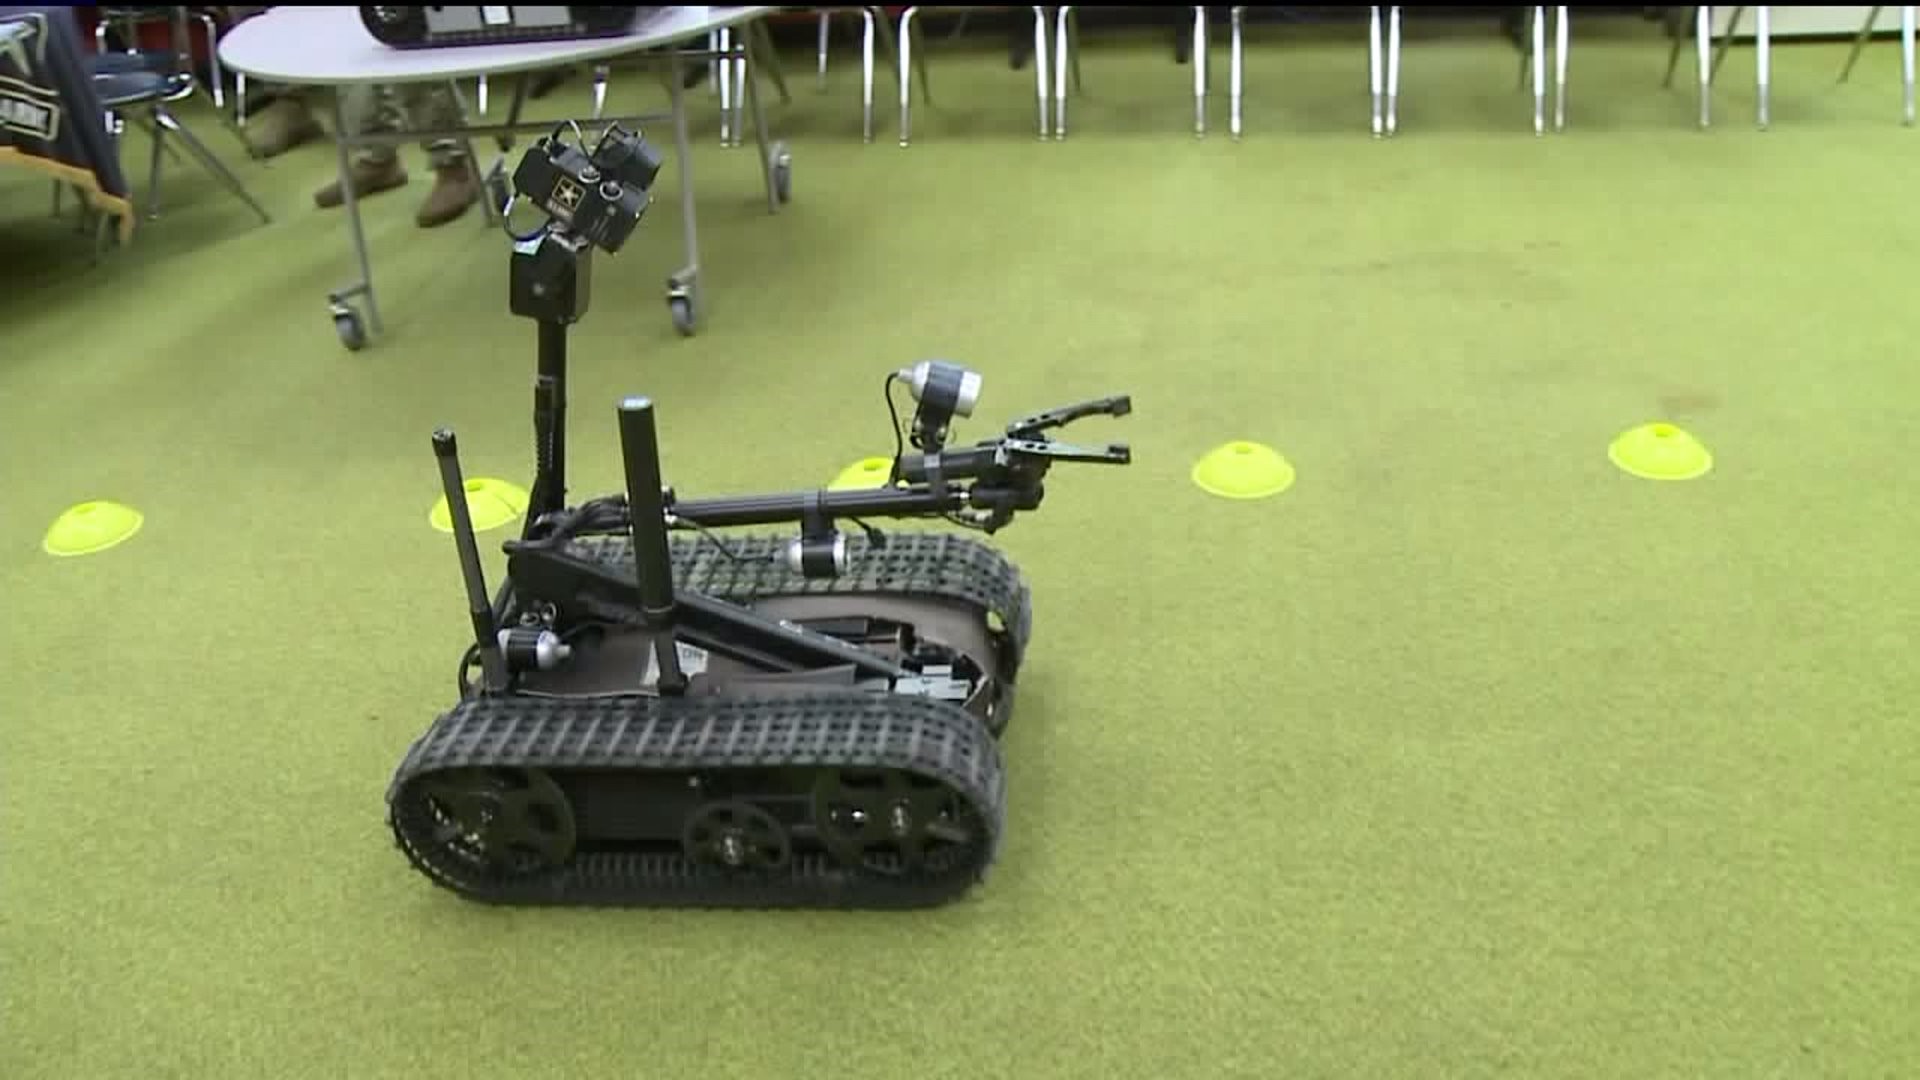 Students use Robot to See How Their Engineering Skills Line up with Jobs in Army